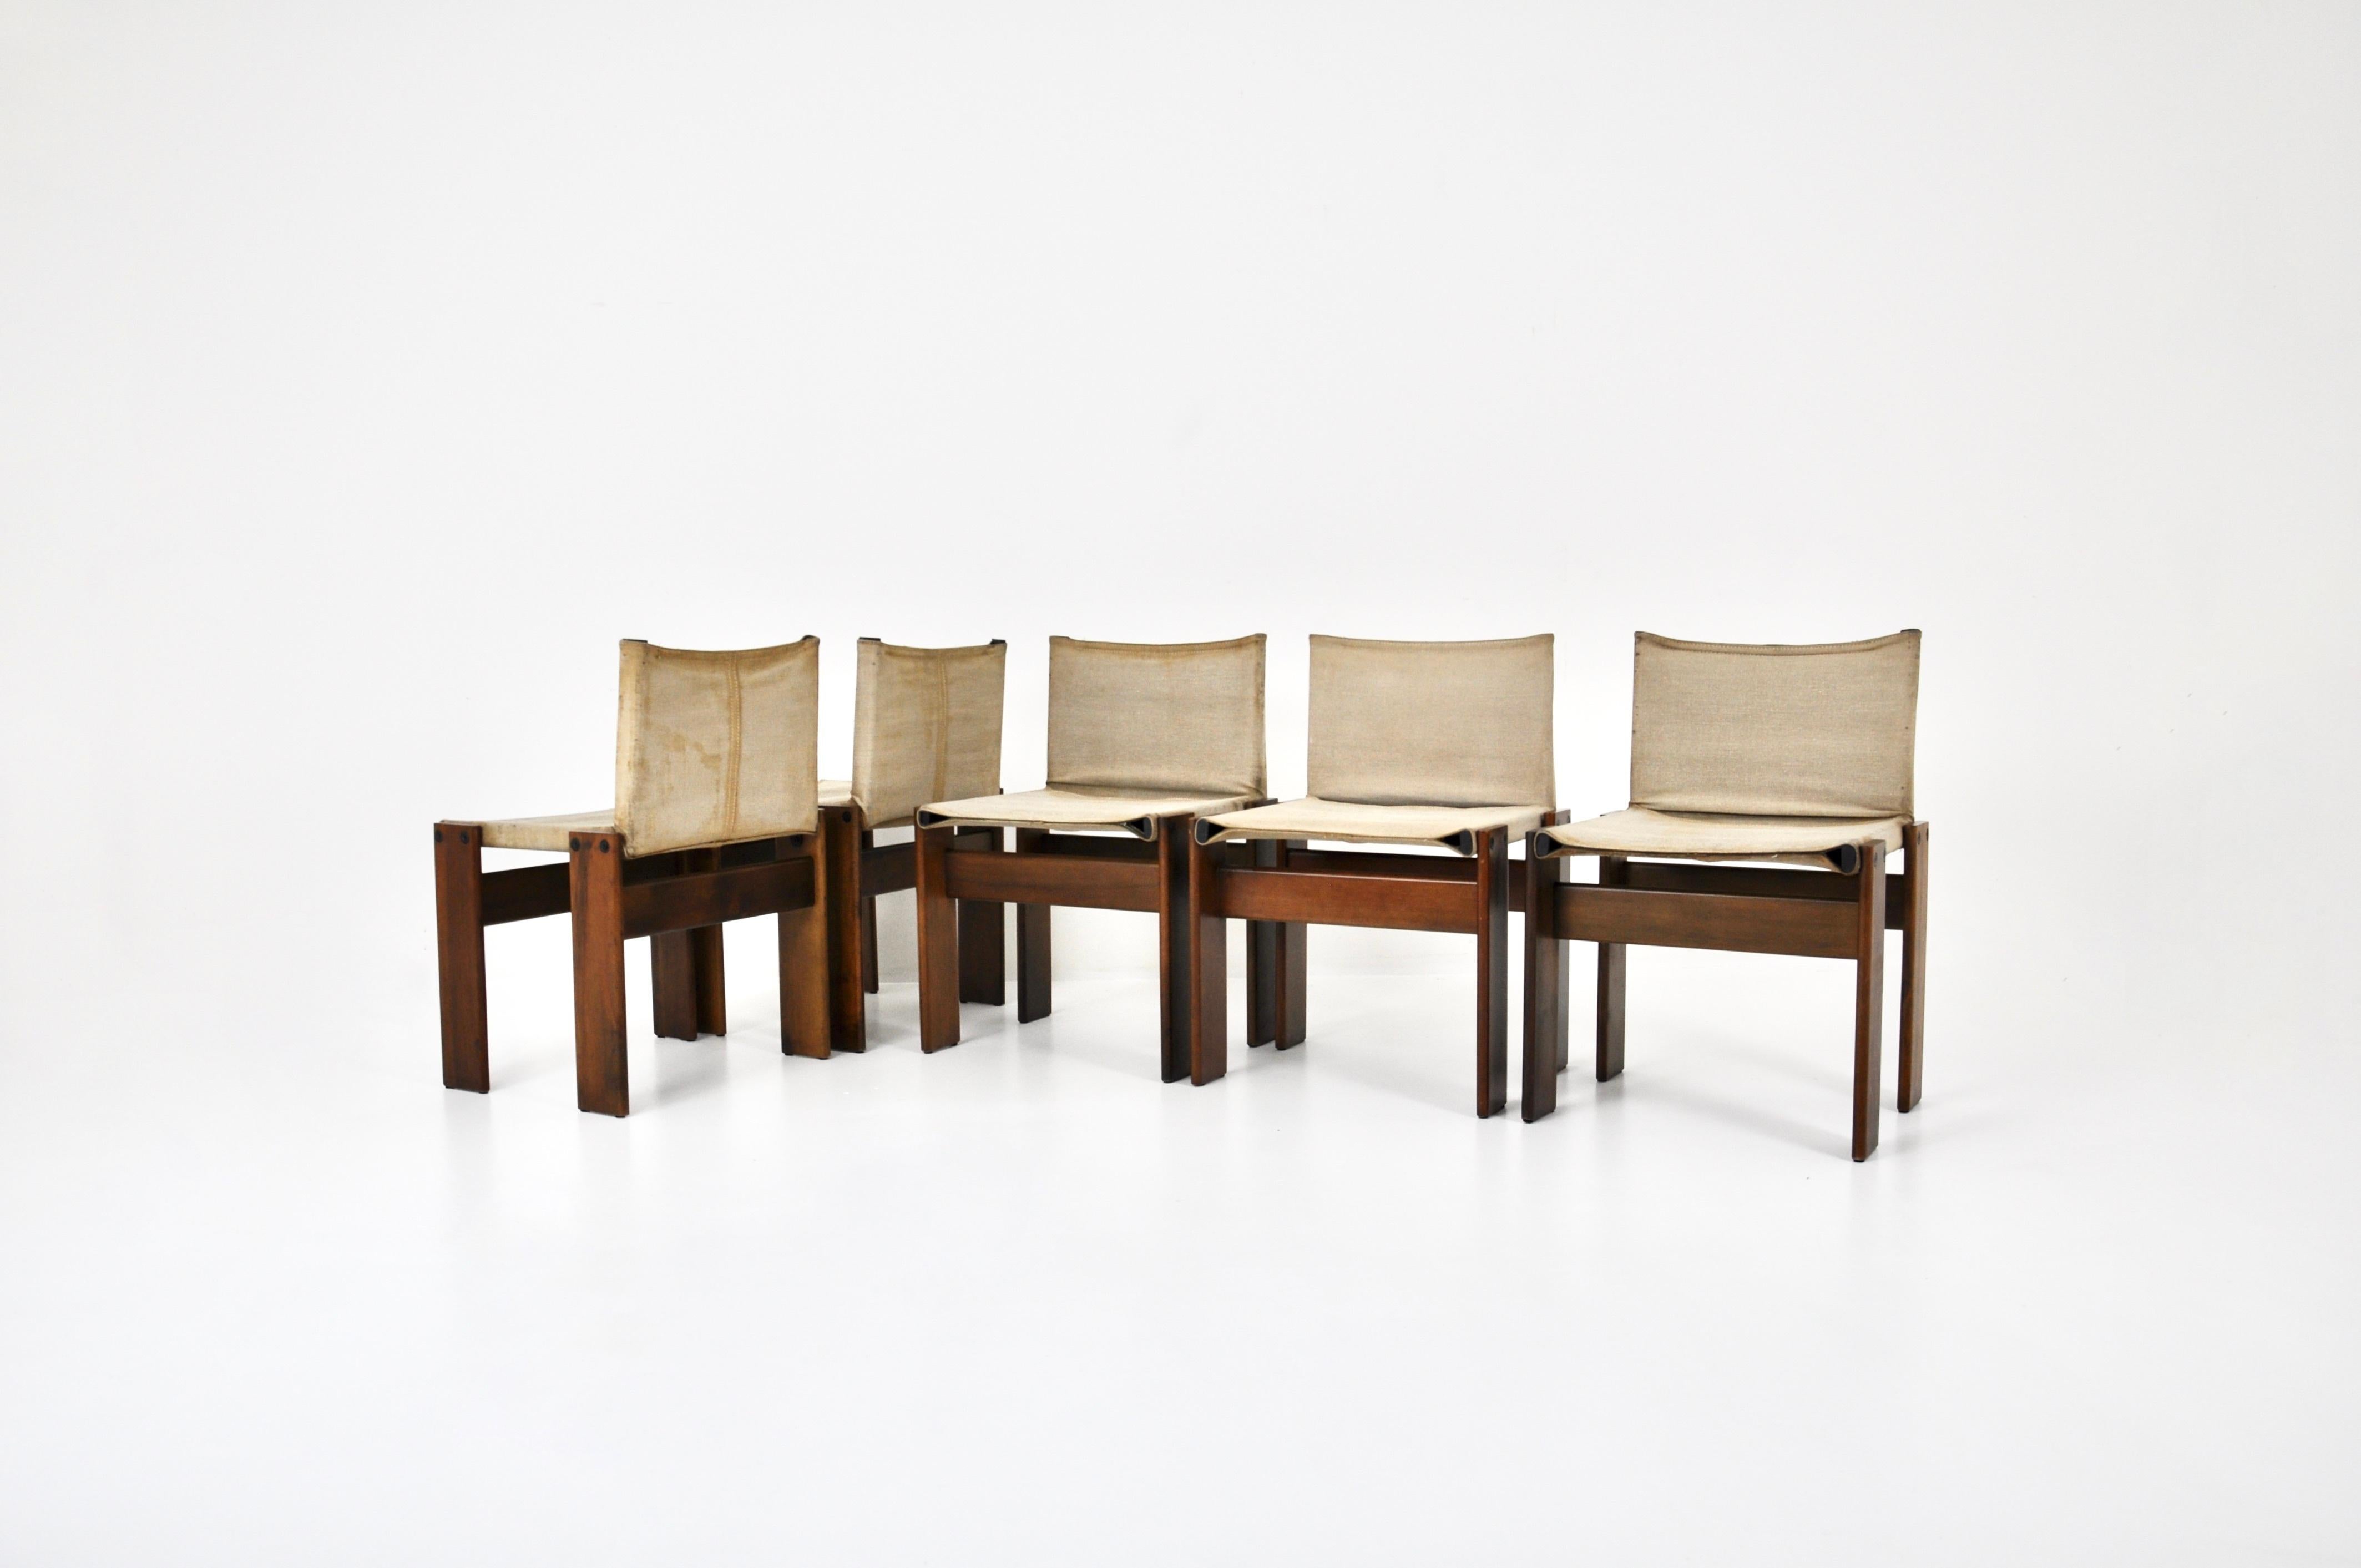 Late 20th Century Monk Dining Chairs by Afra & Tobia Scarpa for Molteni, 1970s, set of 5 For Sale